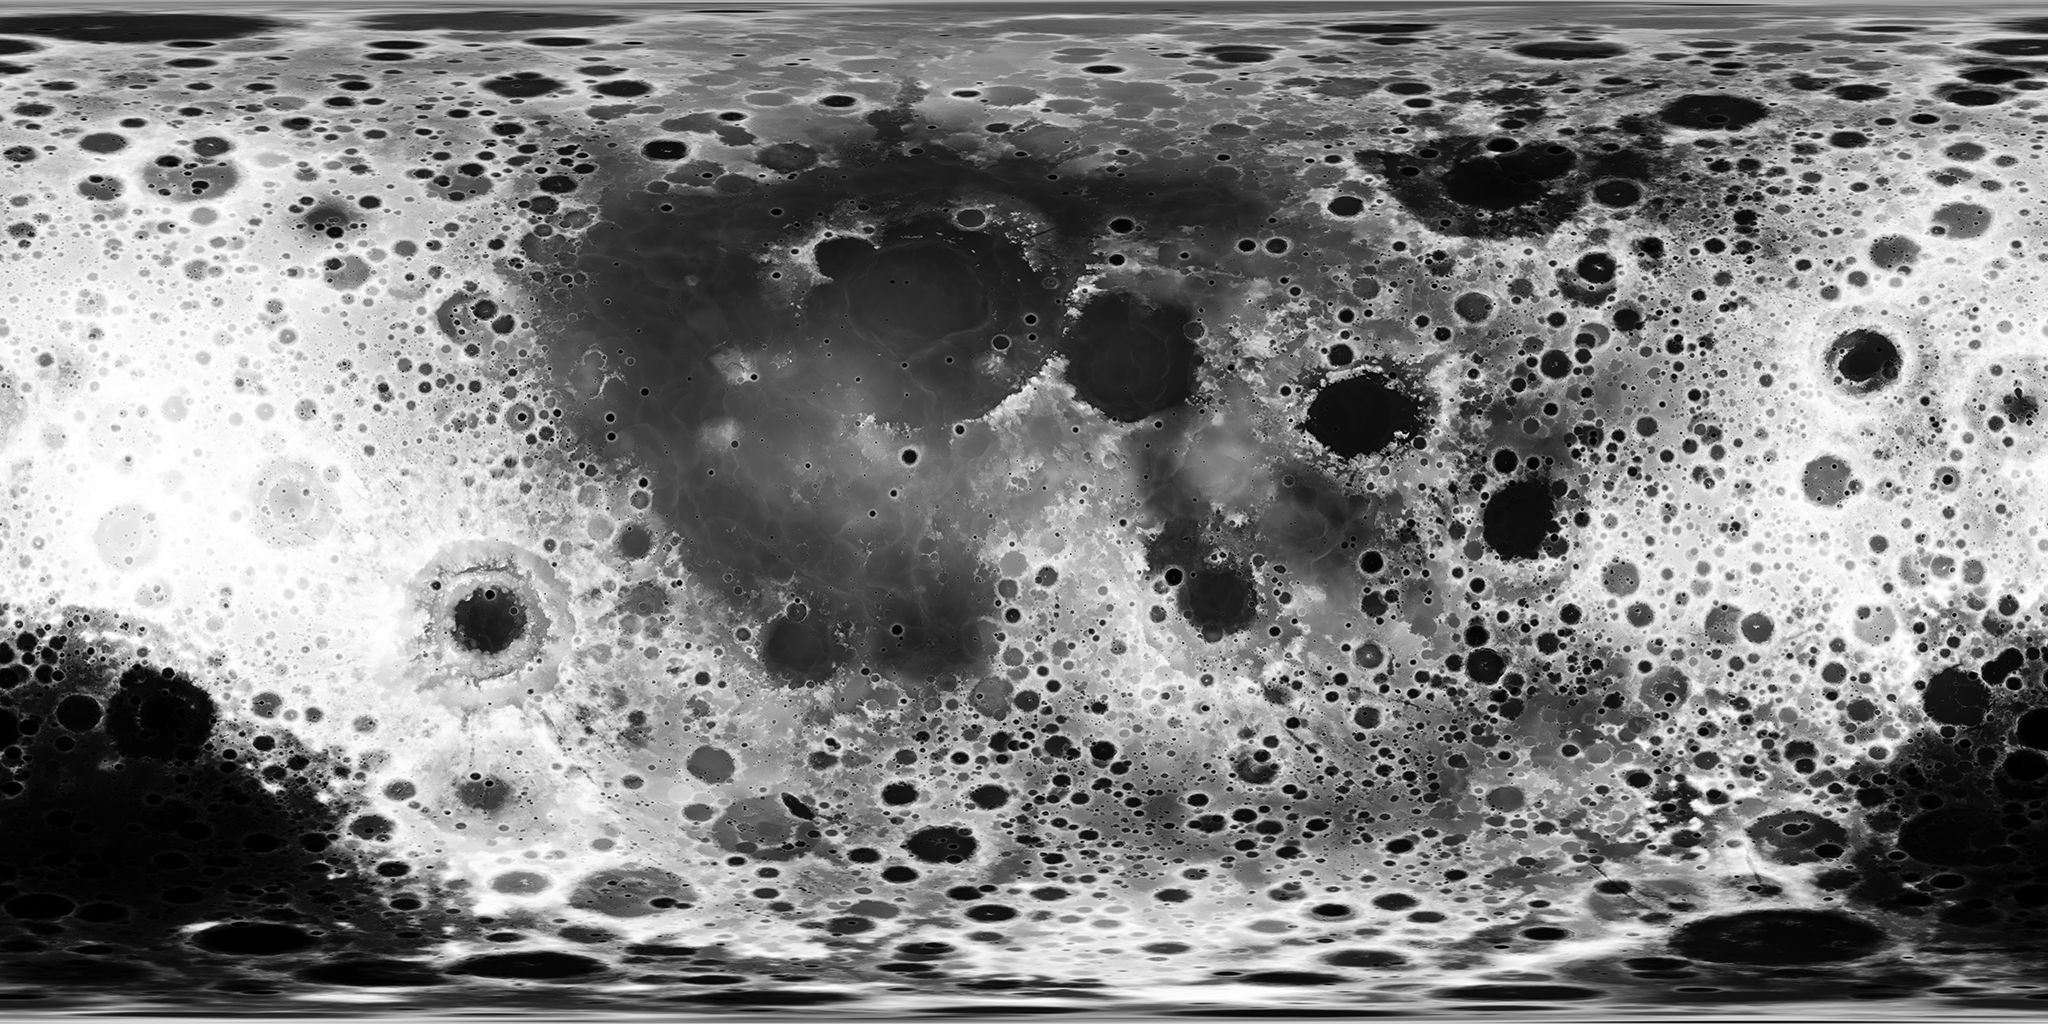 Craters 1